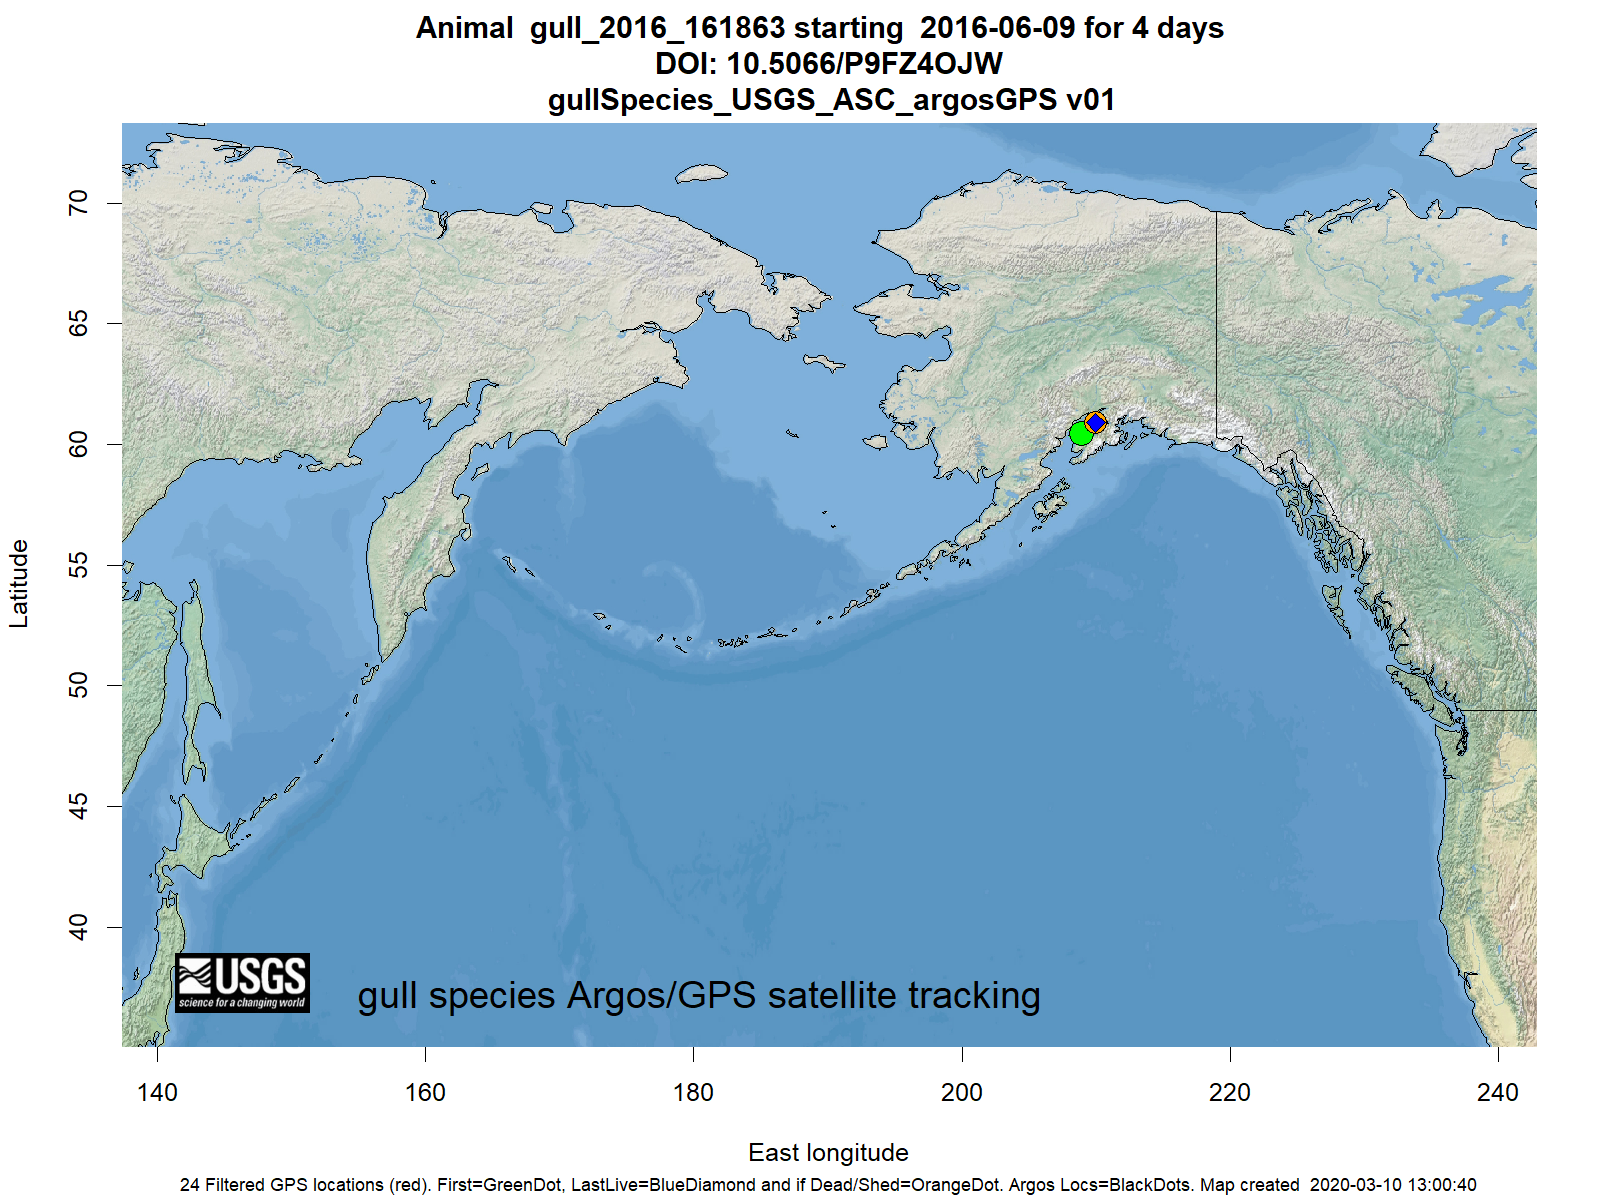 Tracking map for species gull_2016_161863